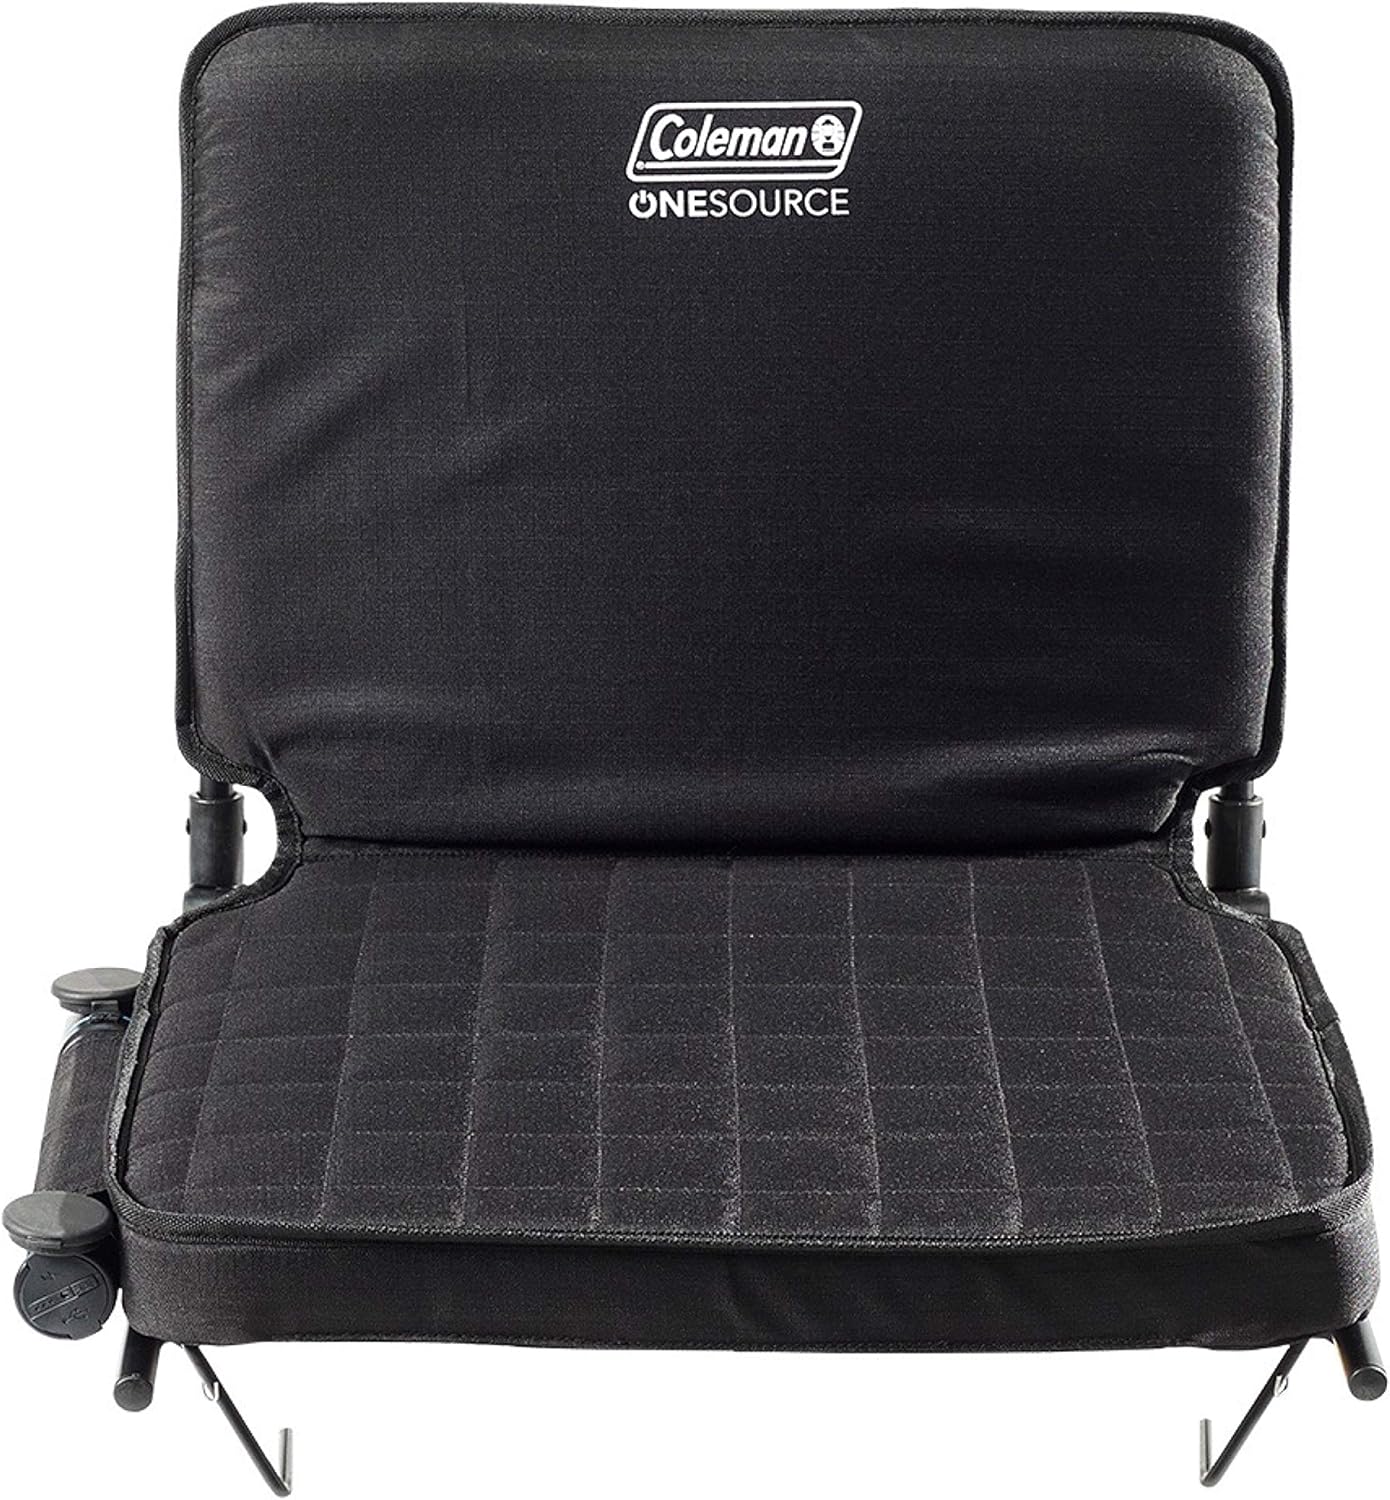 REI Members: Coleman OneSource Heated Stadium Seat with Rechargeable Battery $48.60 + Free Shipping